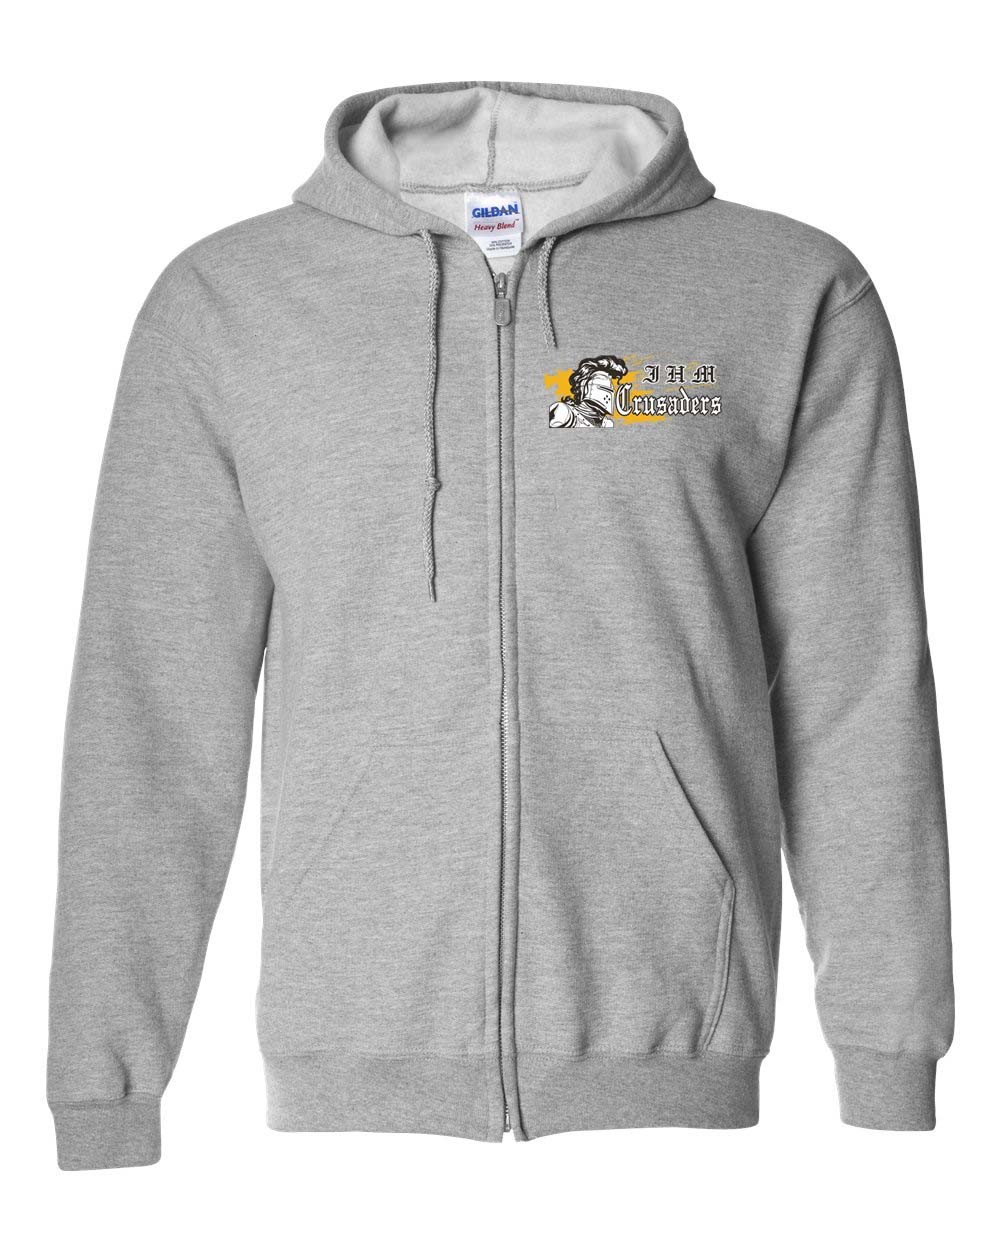 IHM Spirit Zipper Hoodie w/ Crusader Logo - Please allow 2-3 Weeks for Delivery